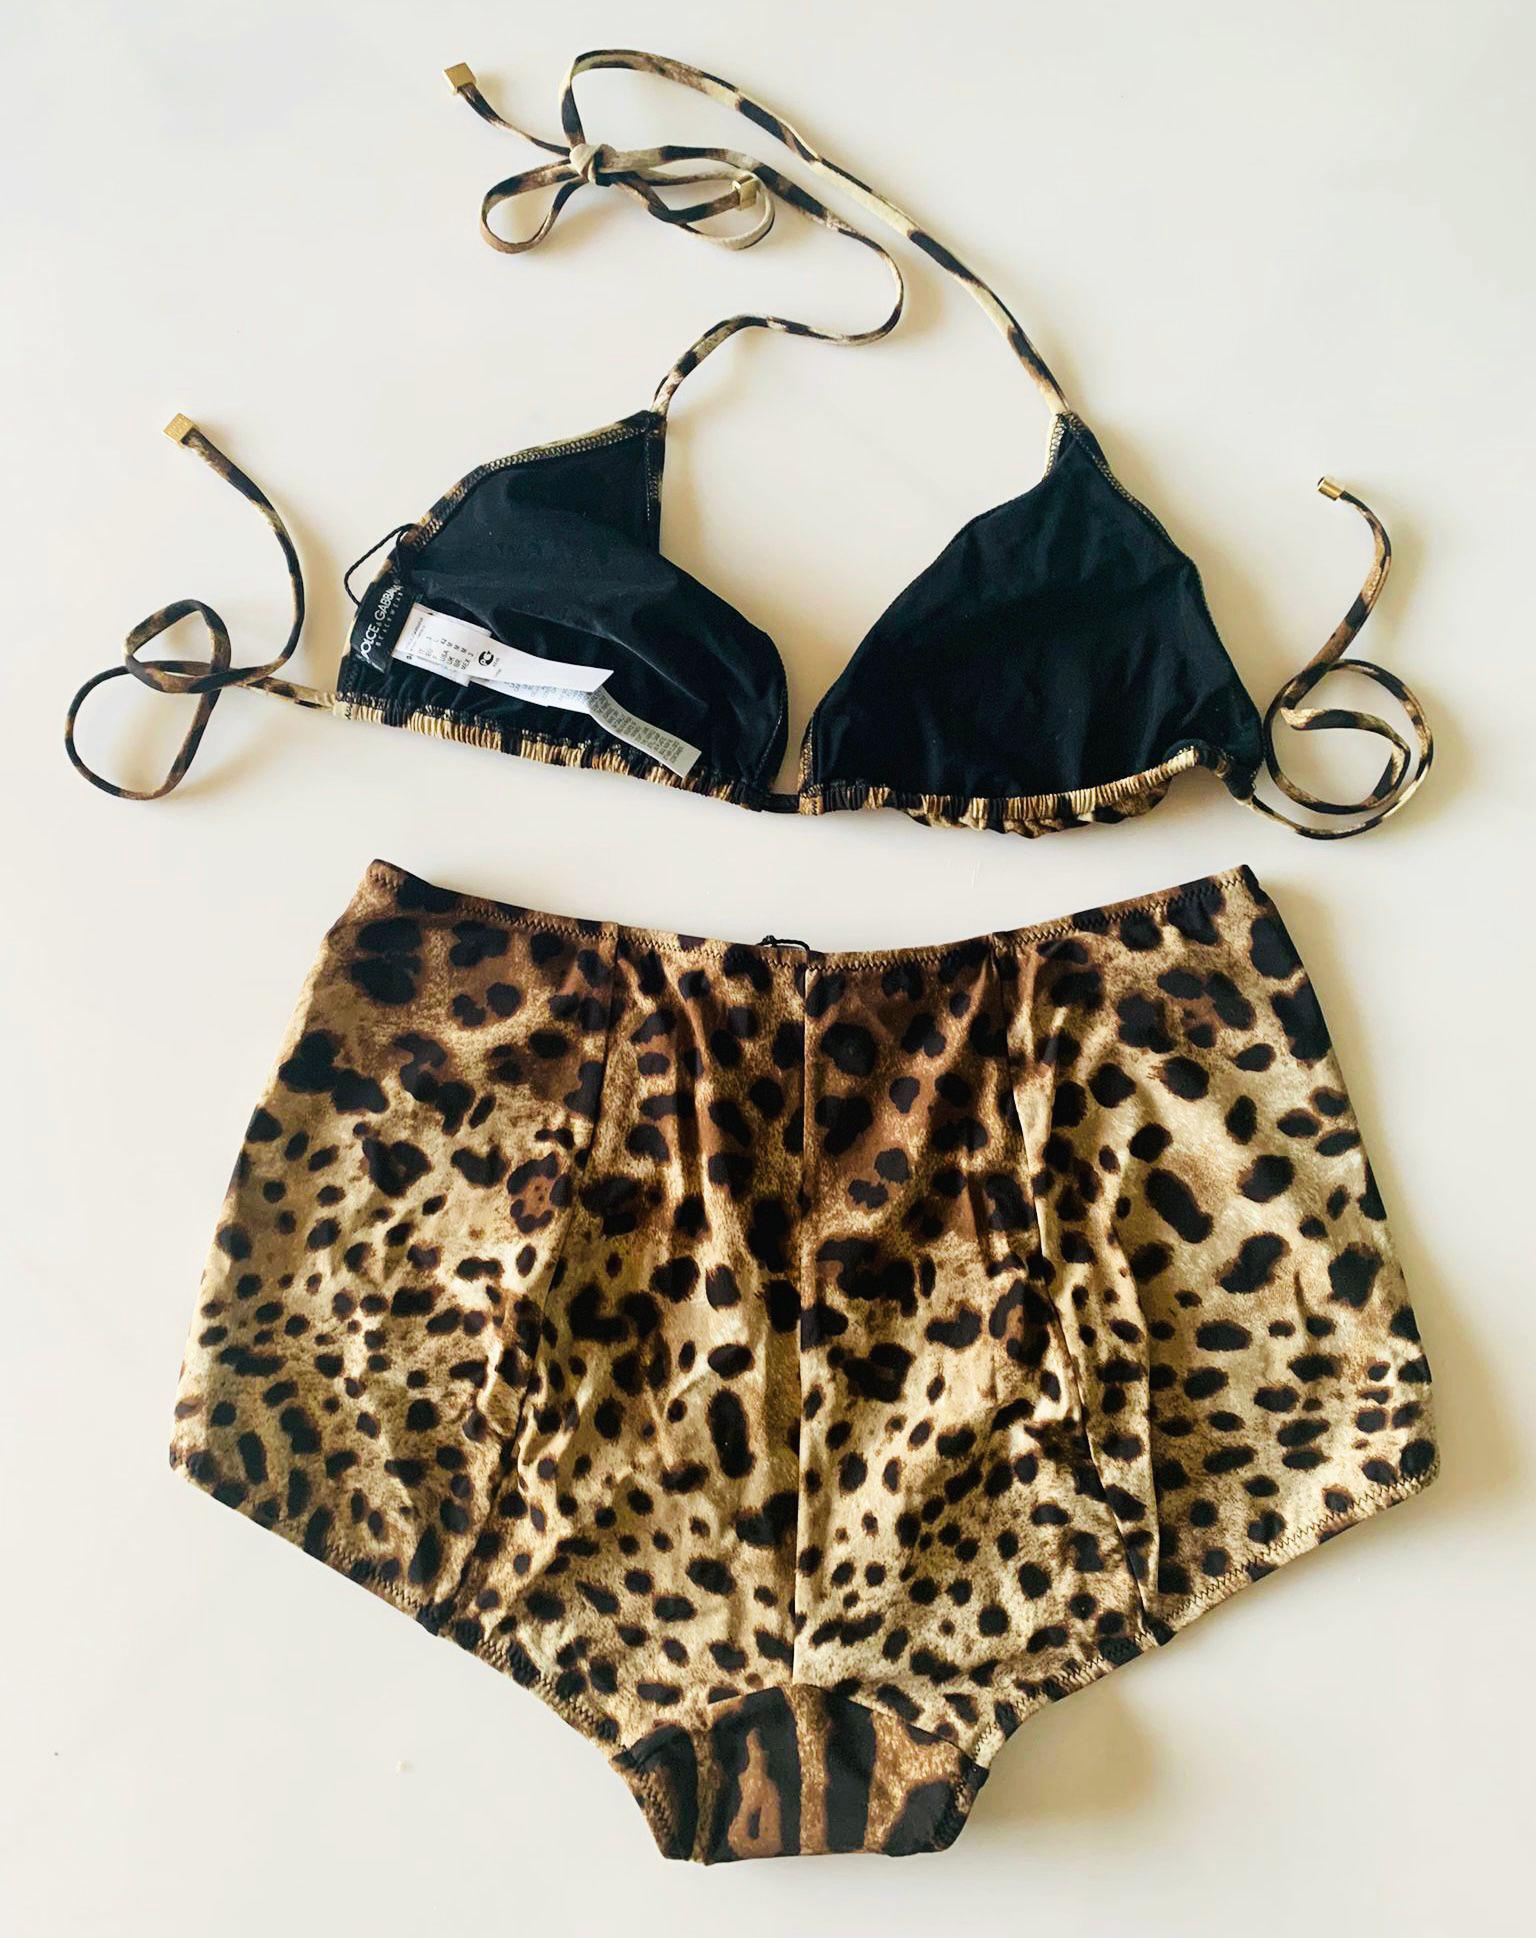 Dolce & Gabbana beachwear bikini set in LEOPARD print is the absolute star of this bikini that features an unpadded triangle bikini top 
and a bikini bottom with high waistline, which has an extremely comfortable fit that adapts to your